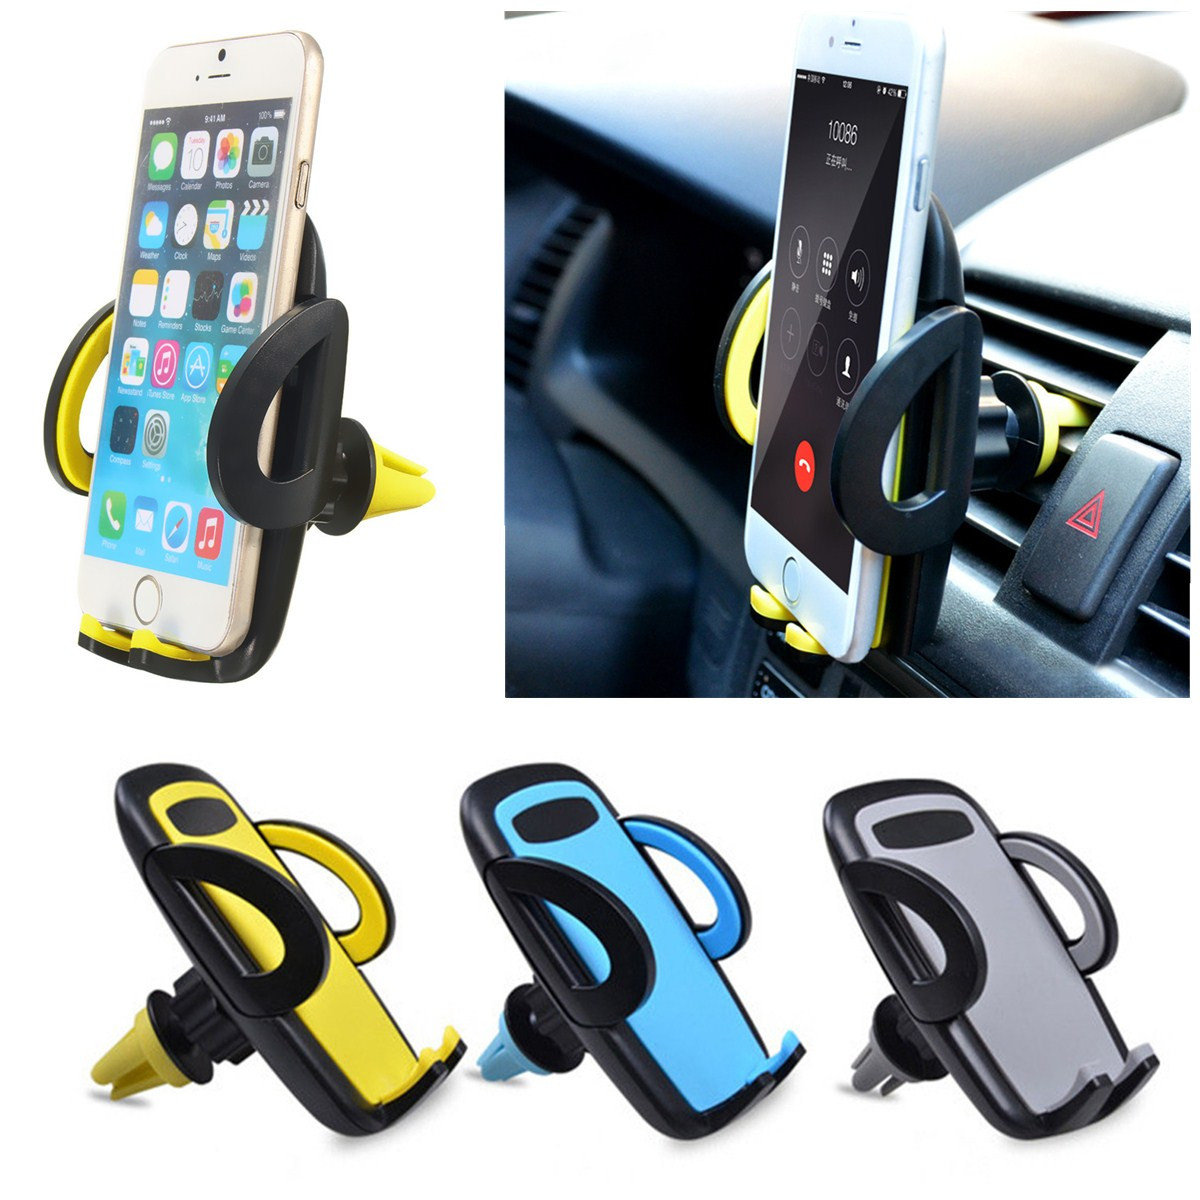 

Universal 360° Rotation Car Air Vent Holder Stand Mount For Mobile Phone Bracket, Blue gray yellow